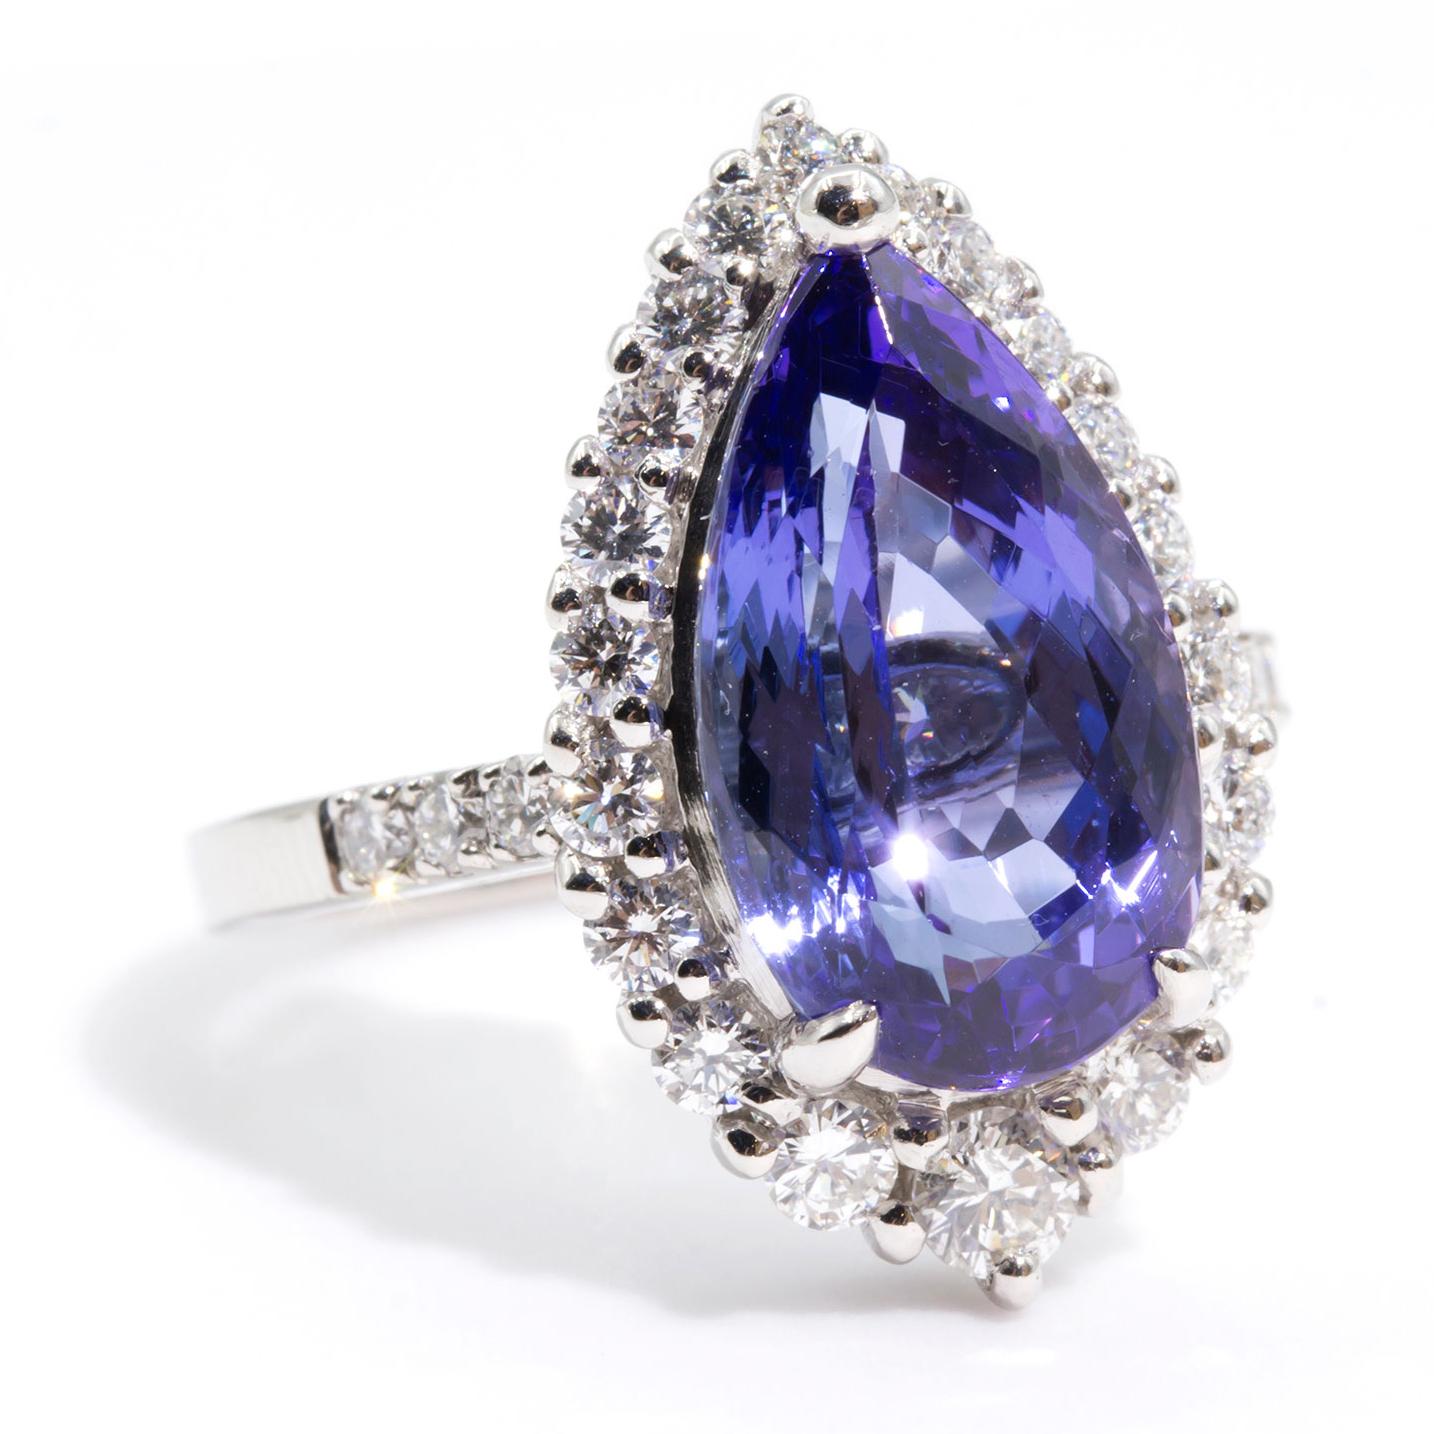 Forged in Platinum is this unique halo cluster ring featuring a mesmerising pear shape 6.19 carat tanzanite, encompassed by 0.78 carats of sparkling round brilliant cut diamonds. There is a secret diamond set under the setting making this ring even